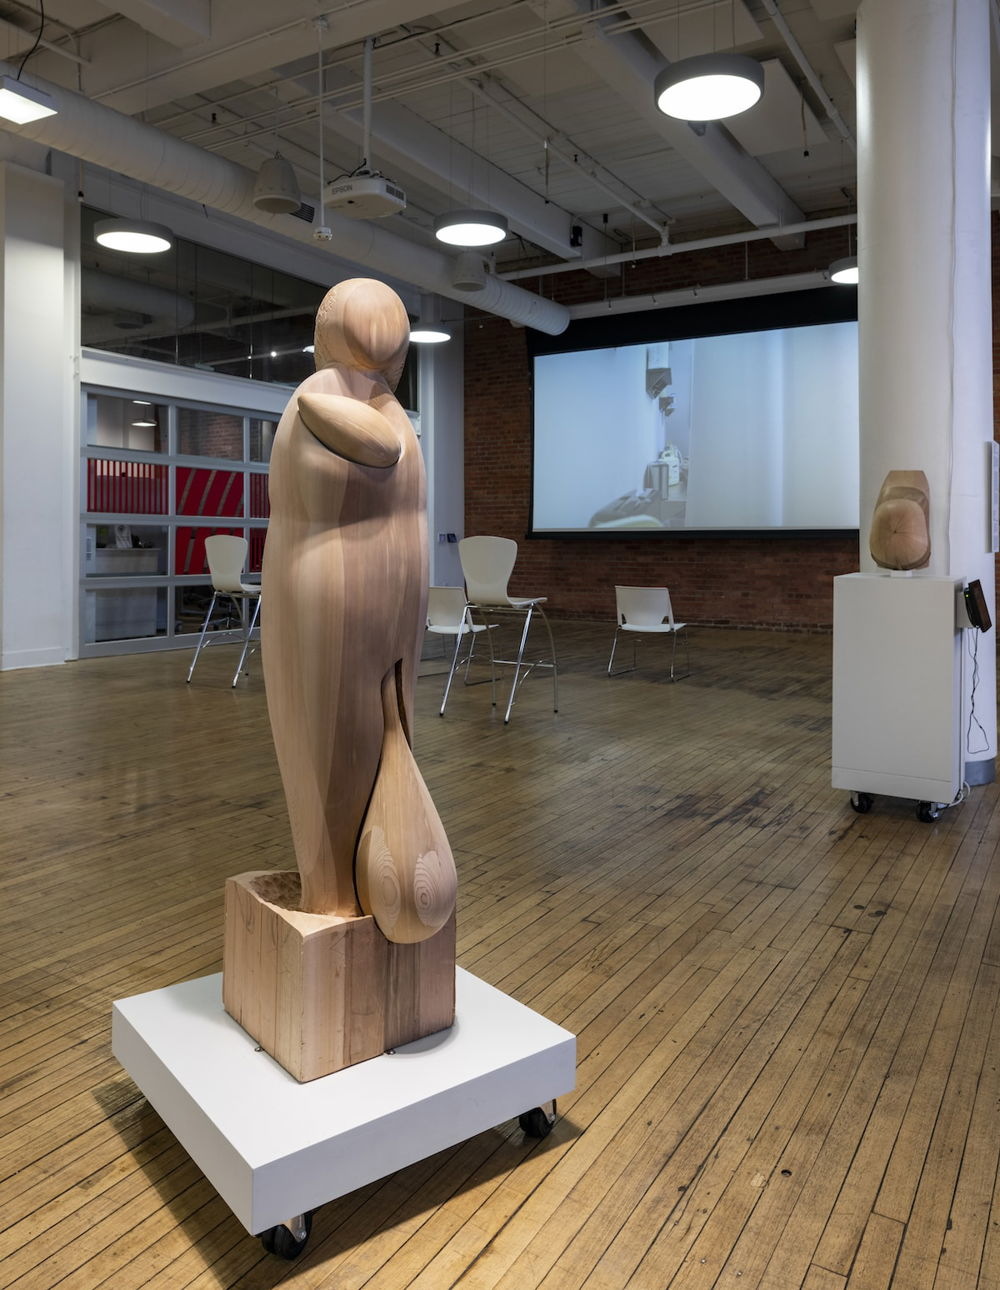 Photograph of a wooden sculpture in an exhibition space. The sculpture is in the shape of a person on a pedestal and has a smooth surface with additional pieces attached — one that resembles an infant in arms, and larger, rounded piece attached at the bottom that resembles a sack.